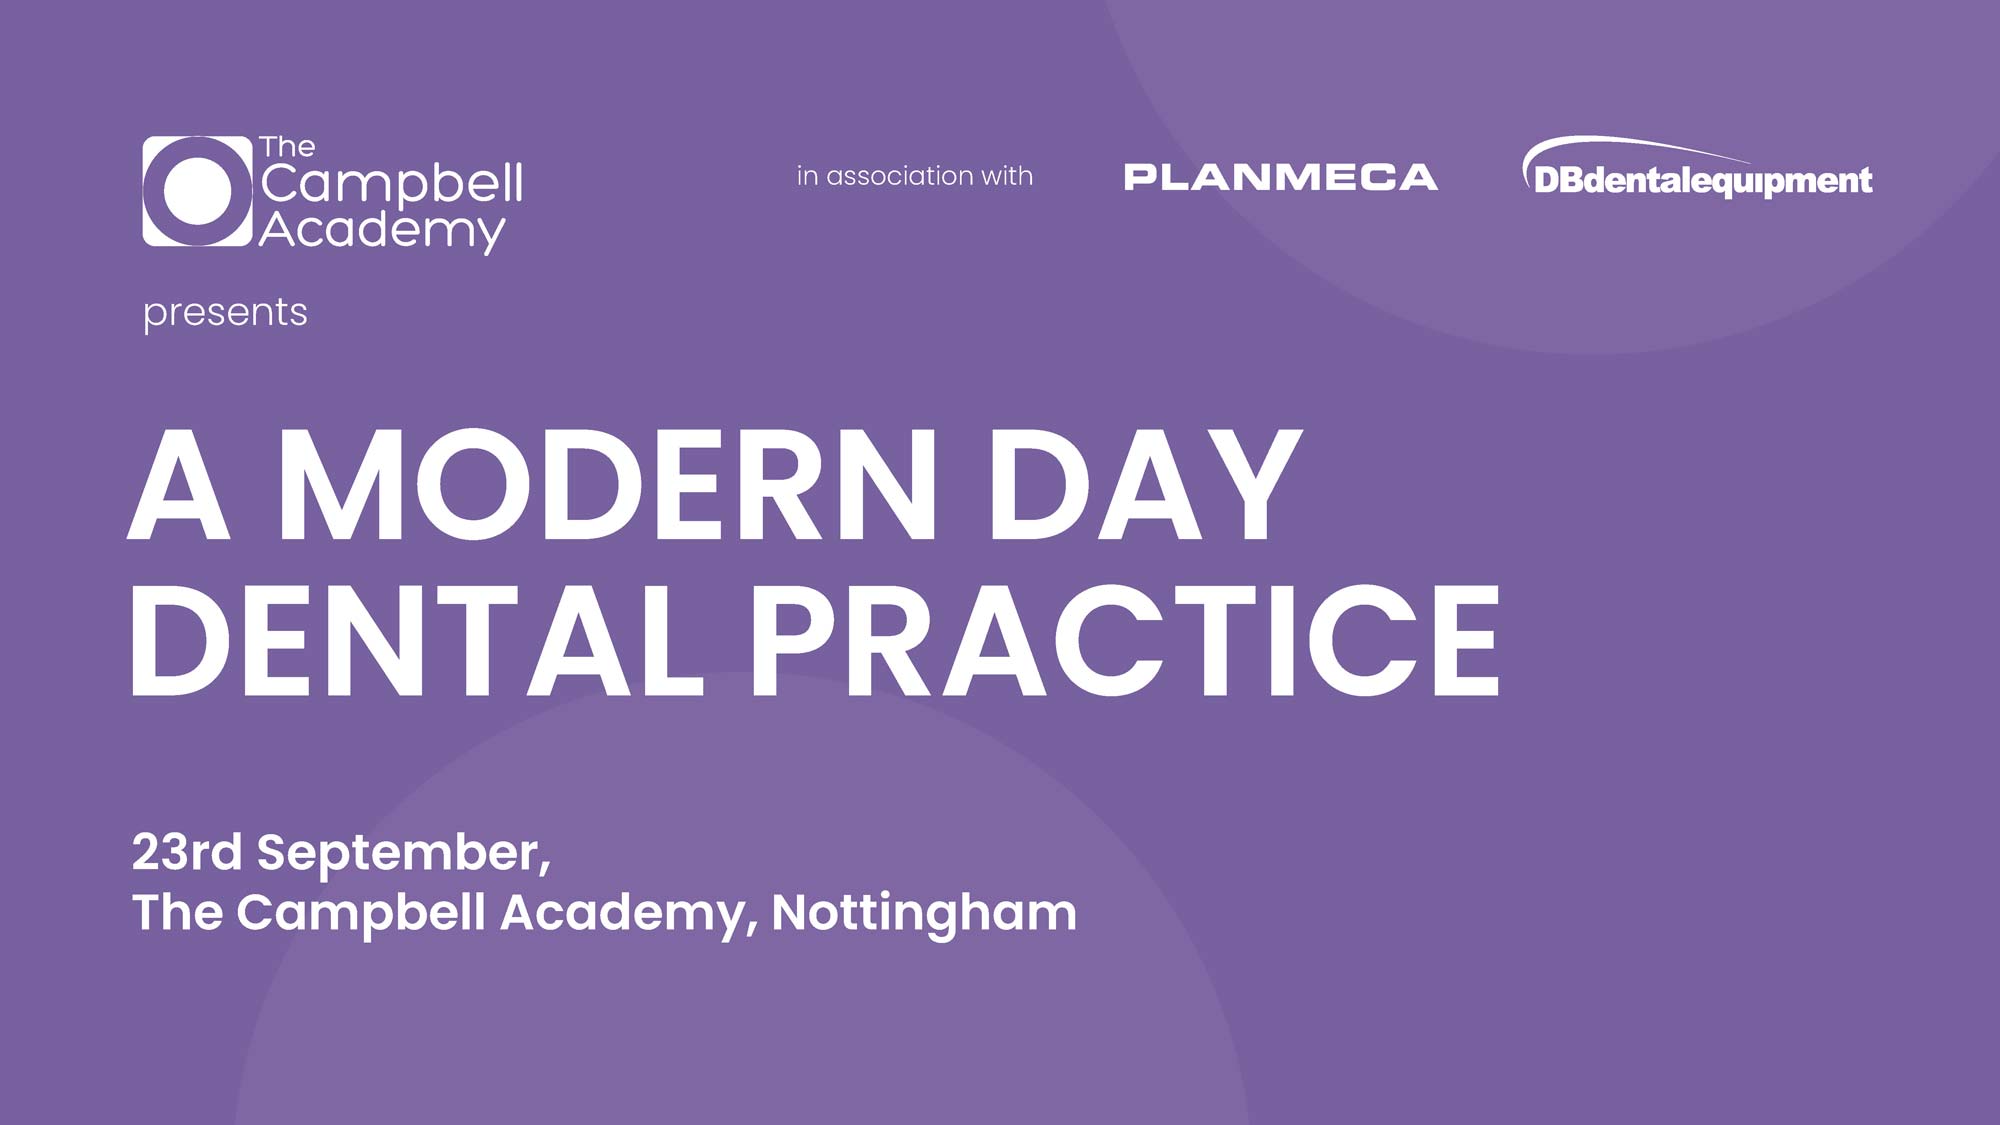 A modern day dental practice event